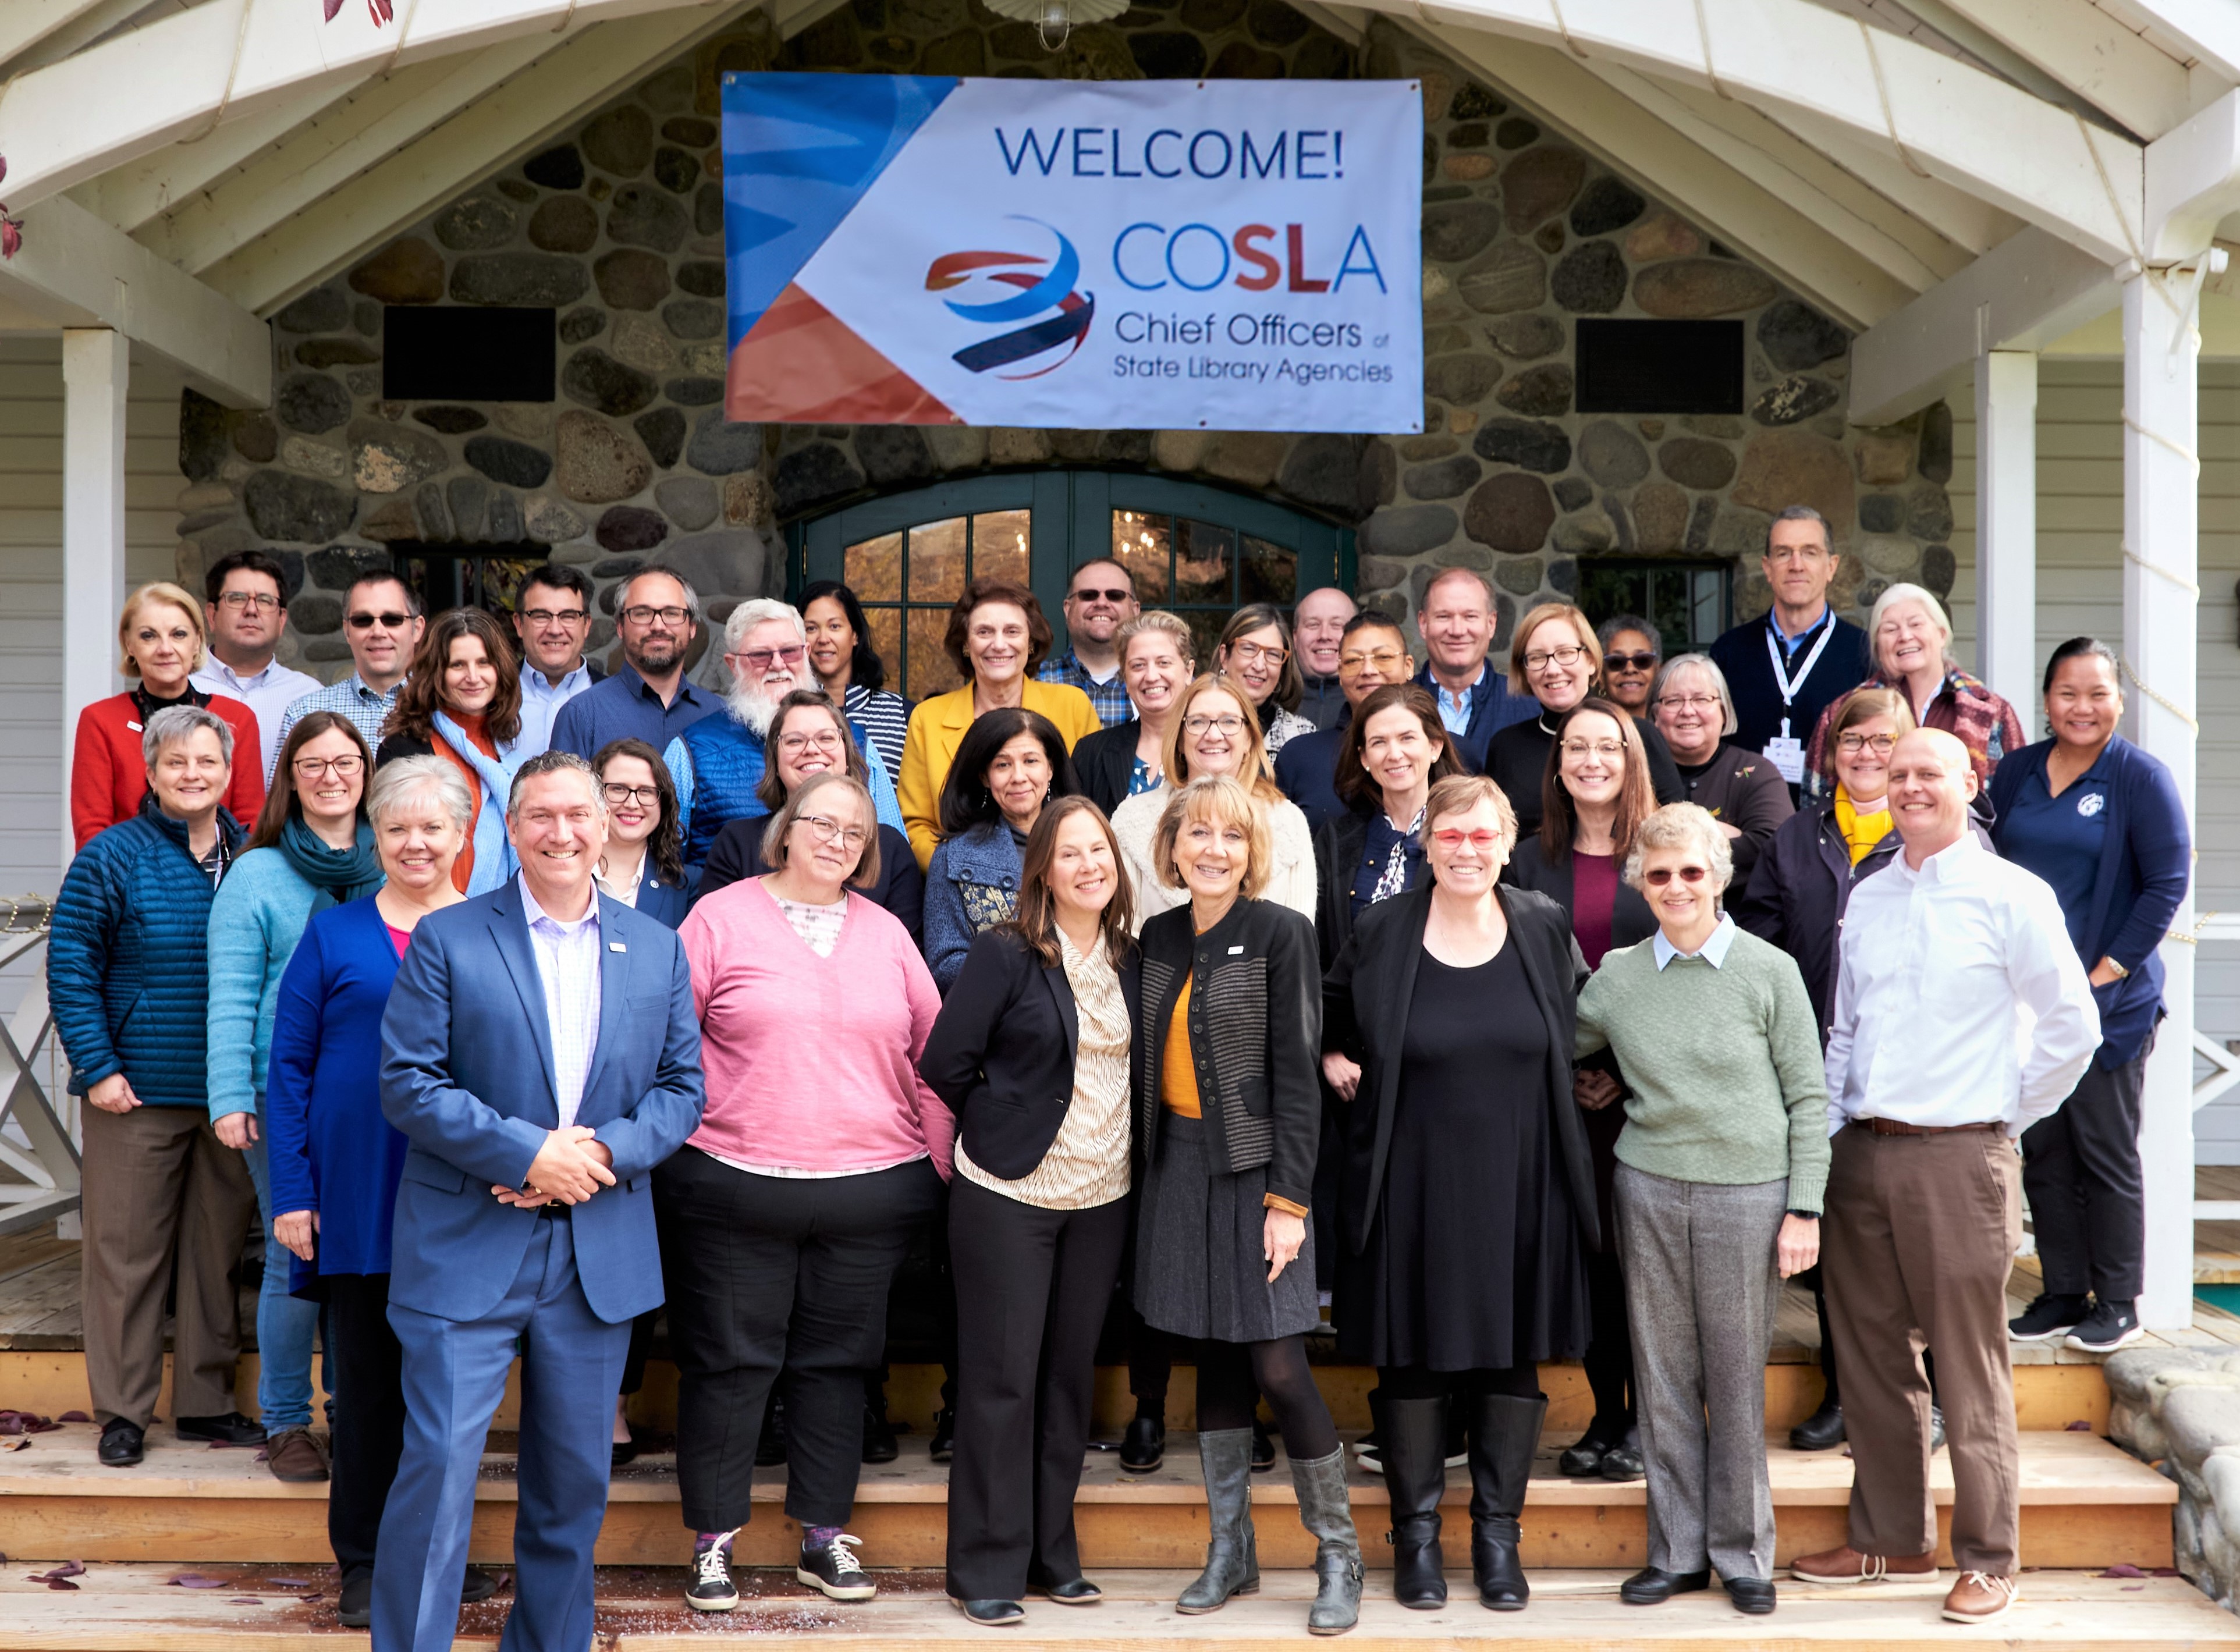 COSLA Fall Conference - Chief Group Picture